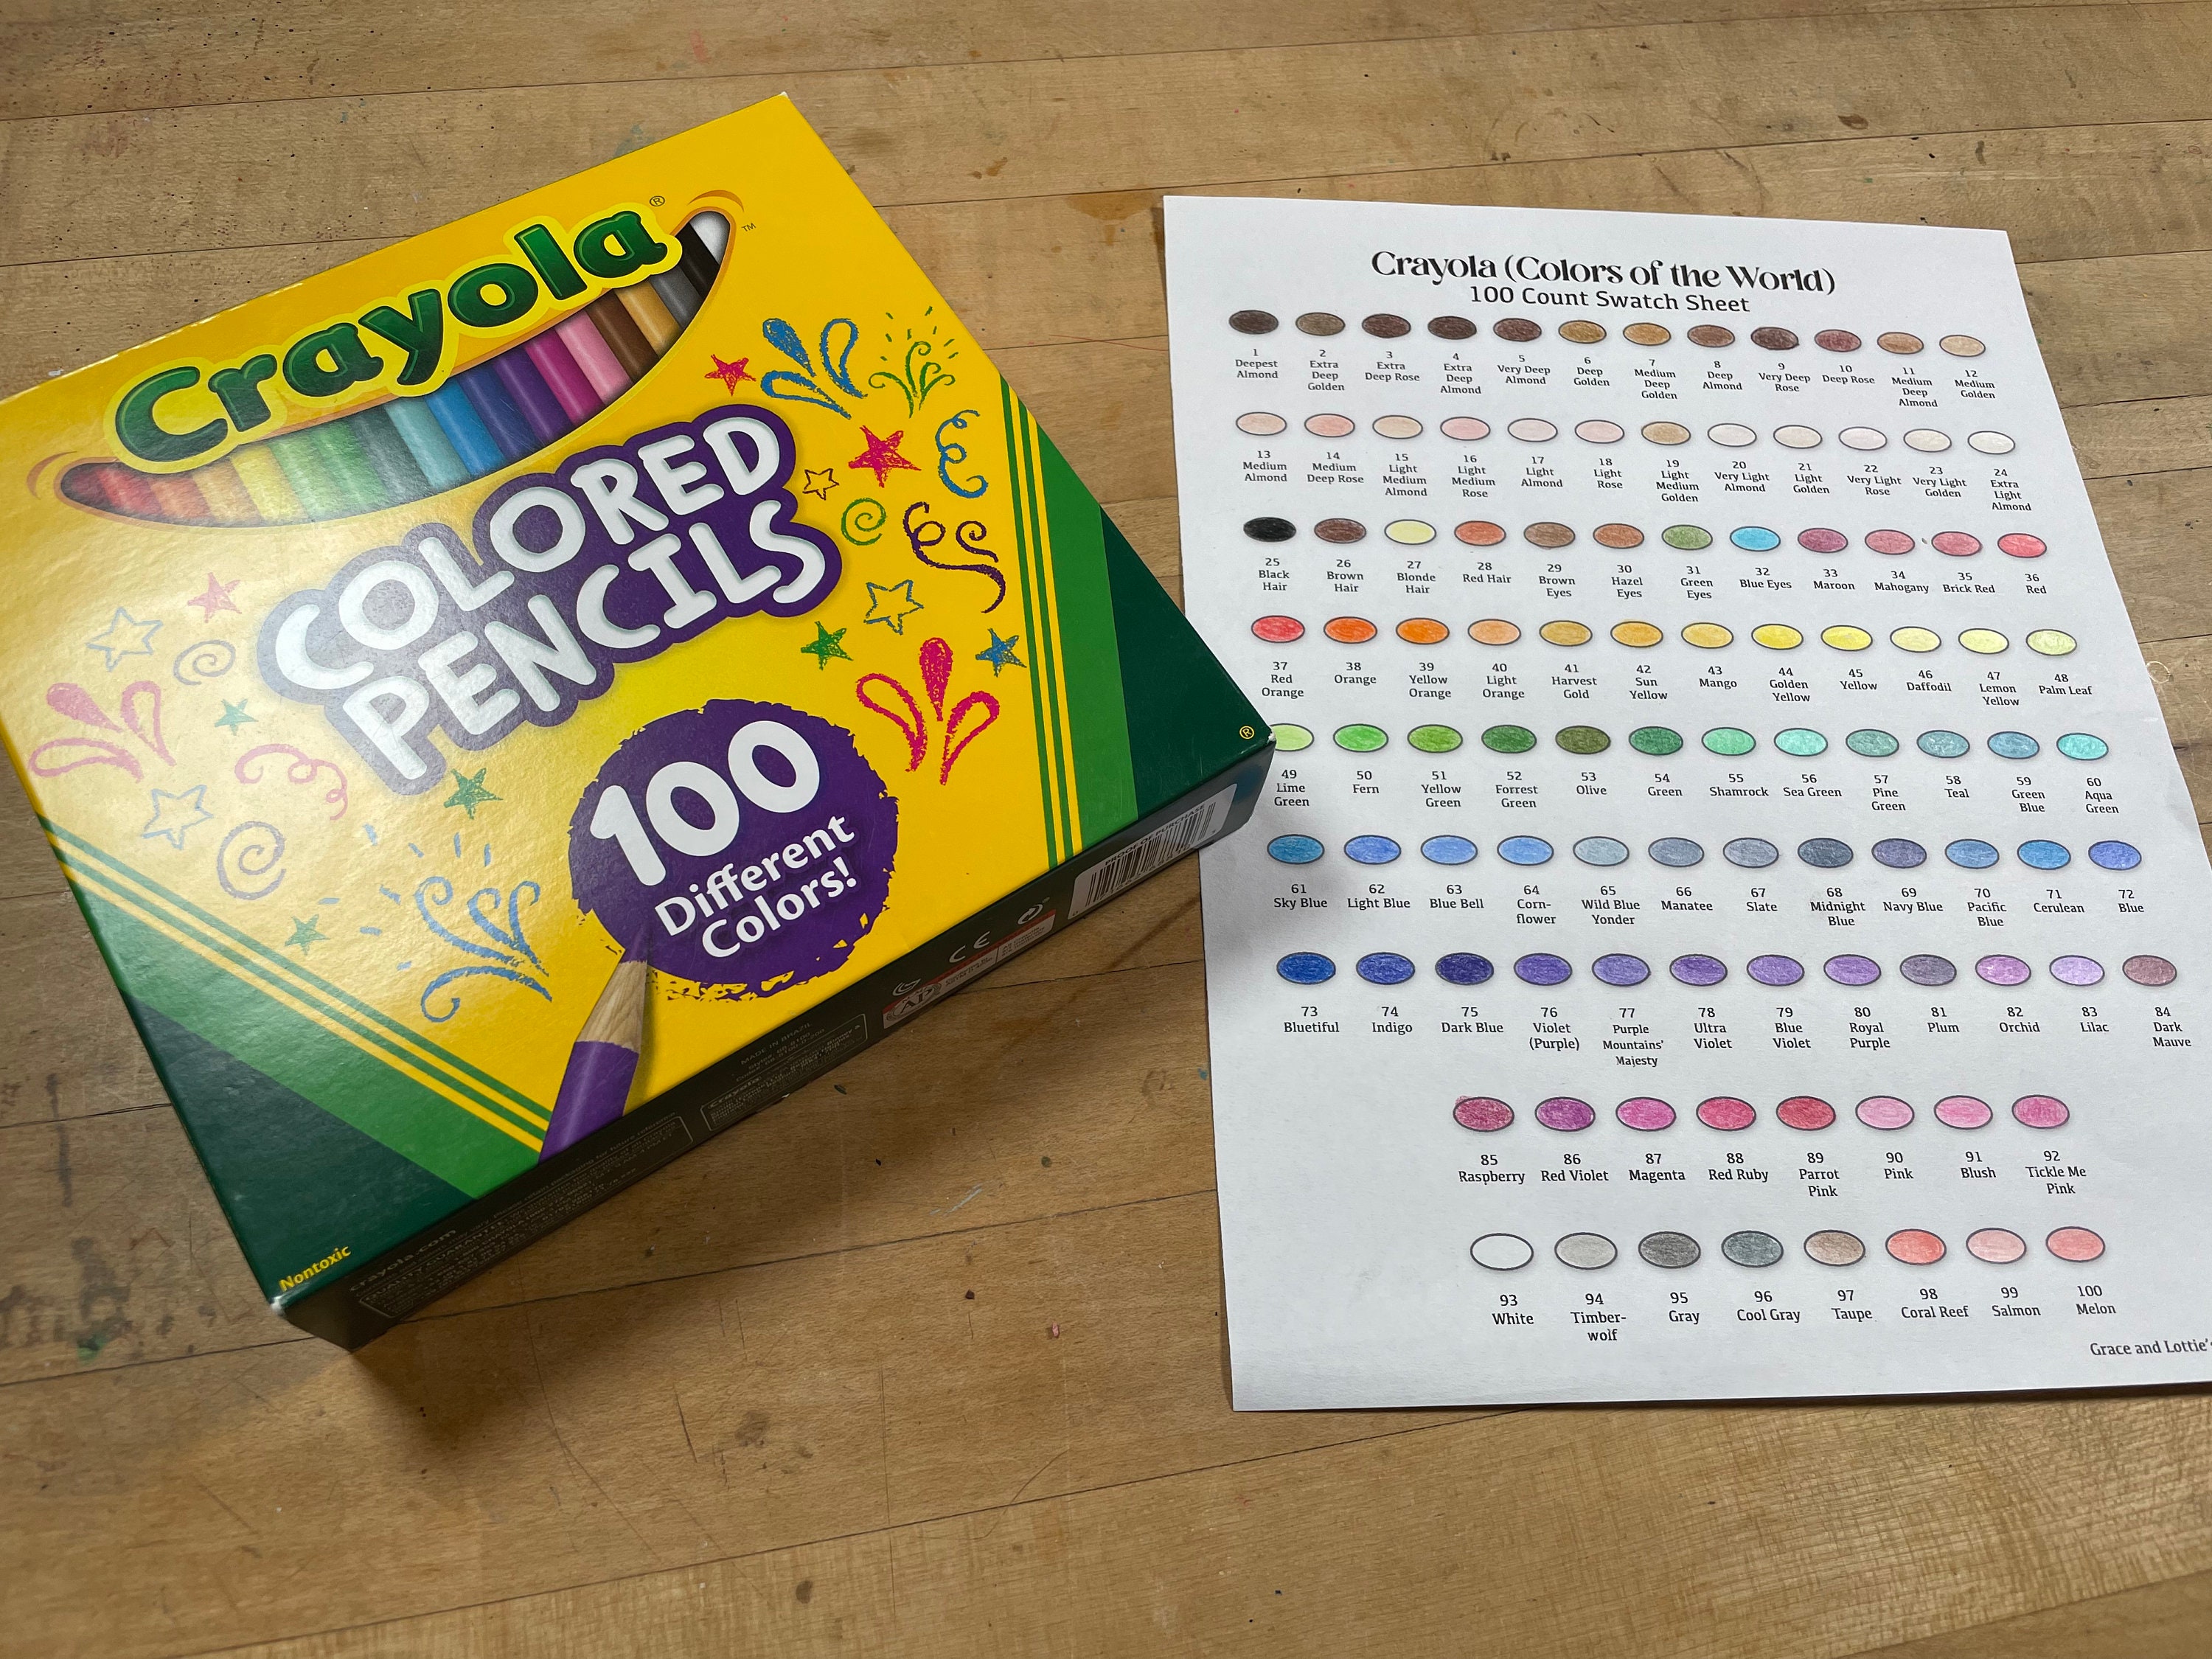 Crayola Colors of the World 100-count Swatch Sheet 